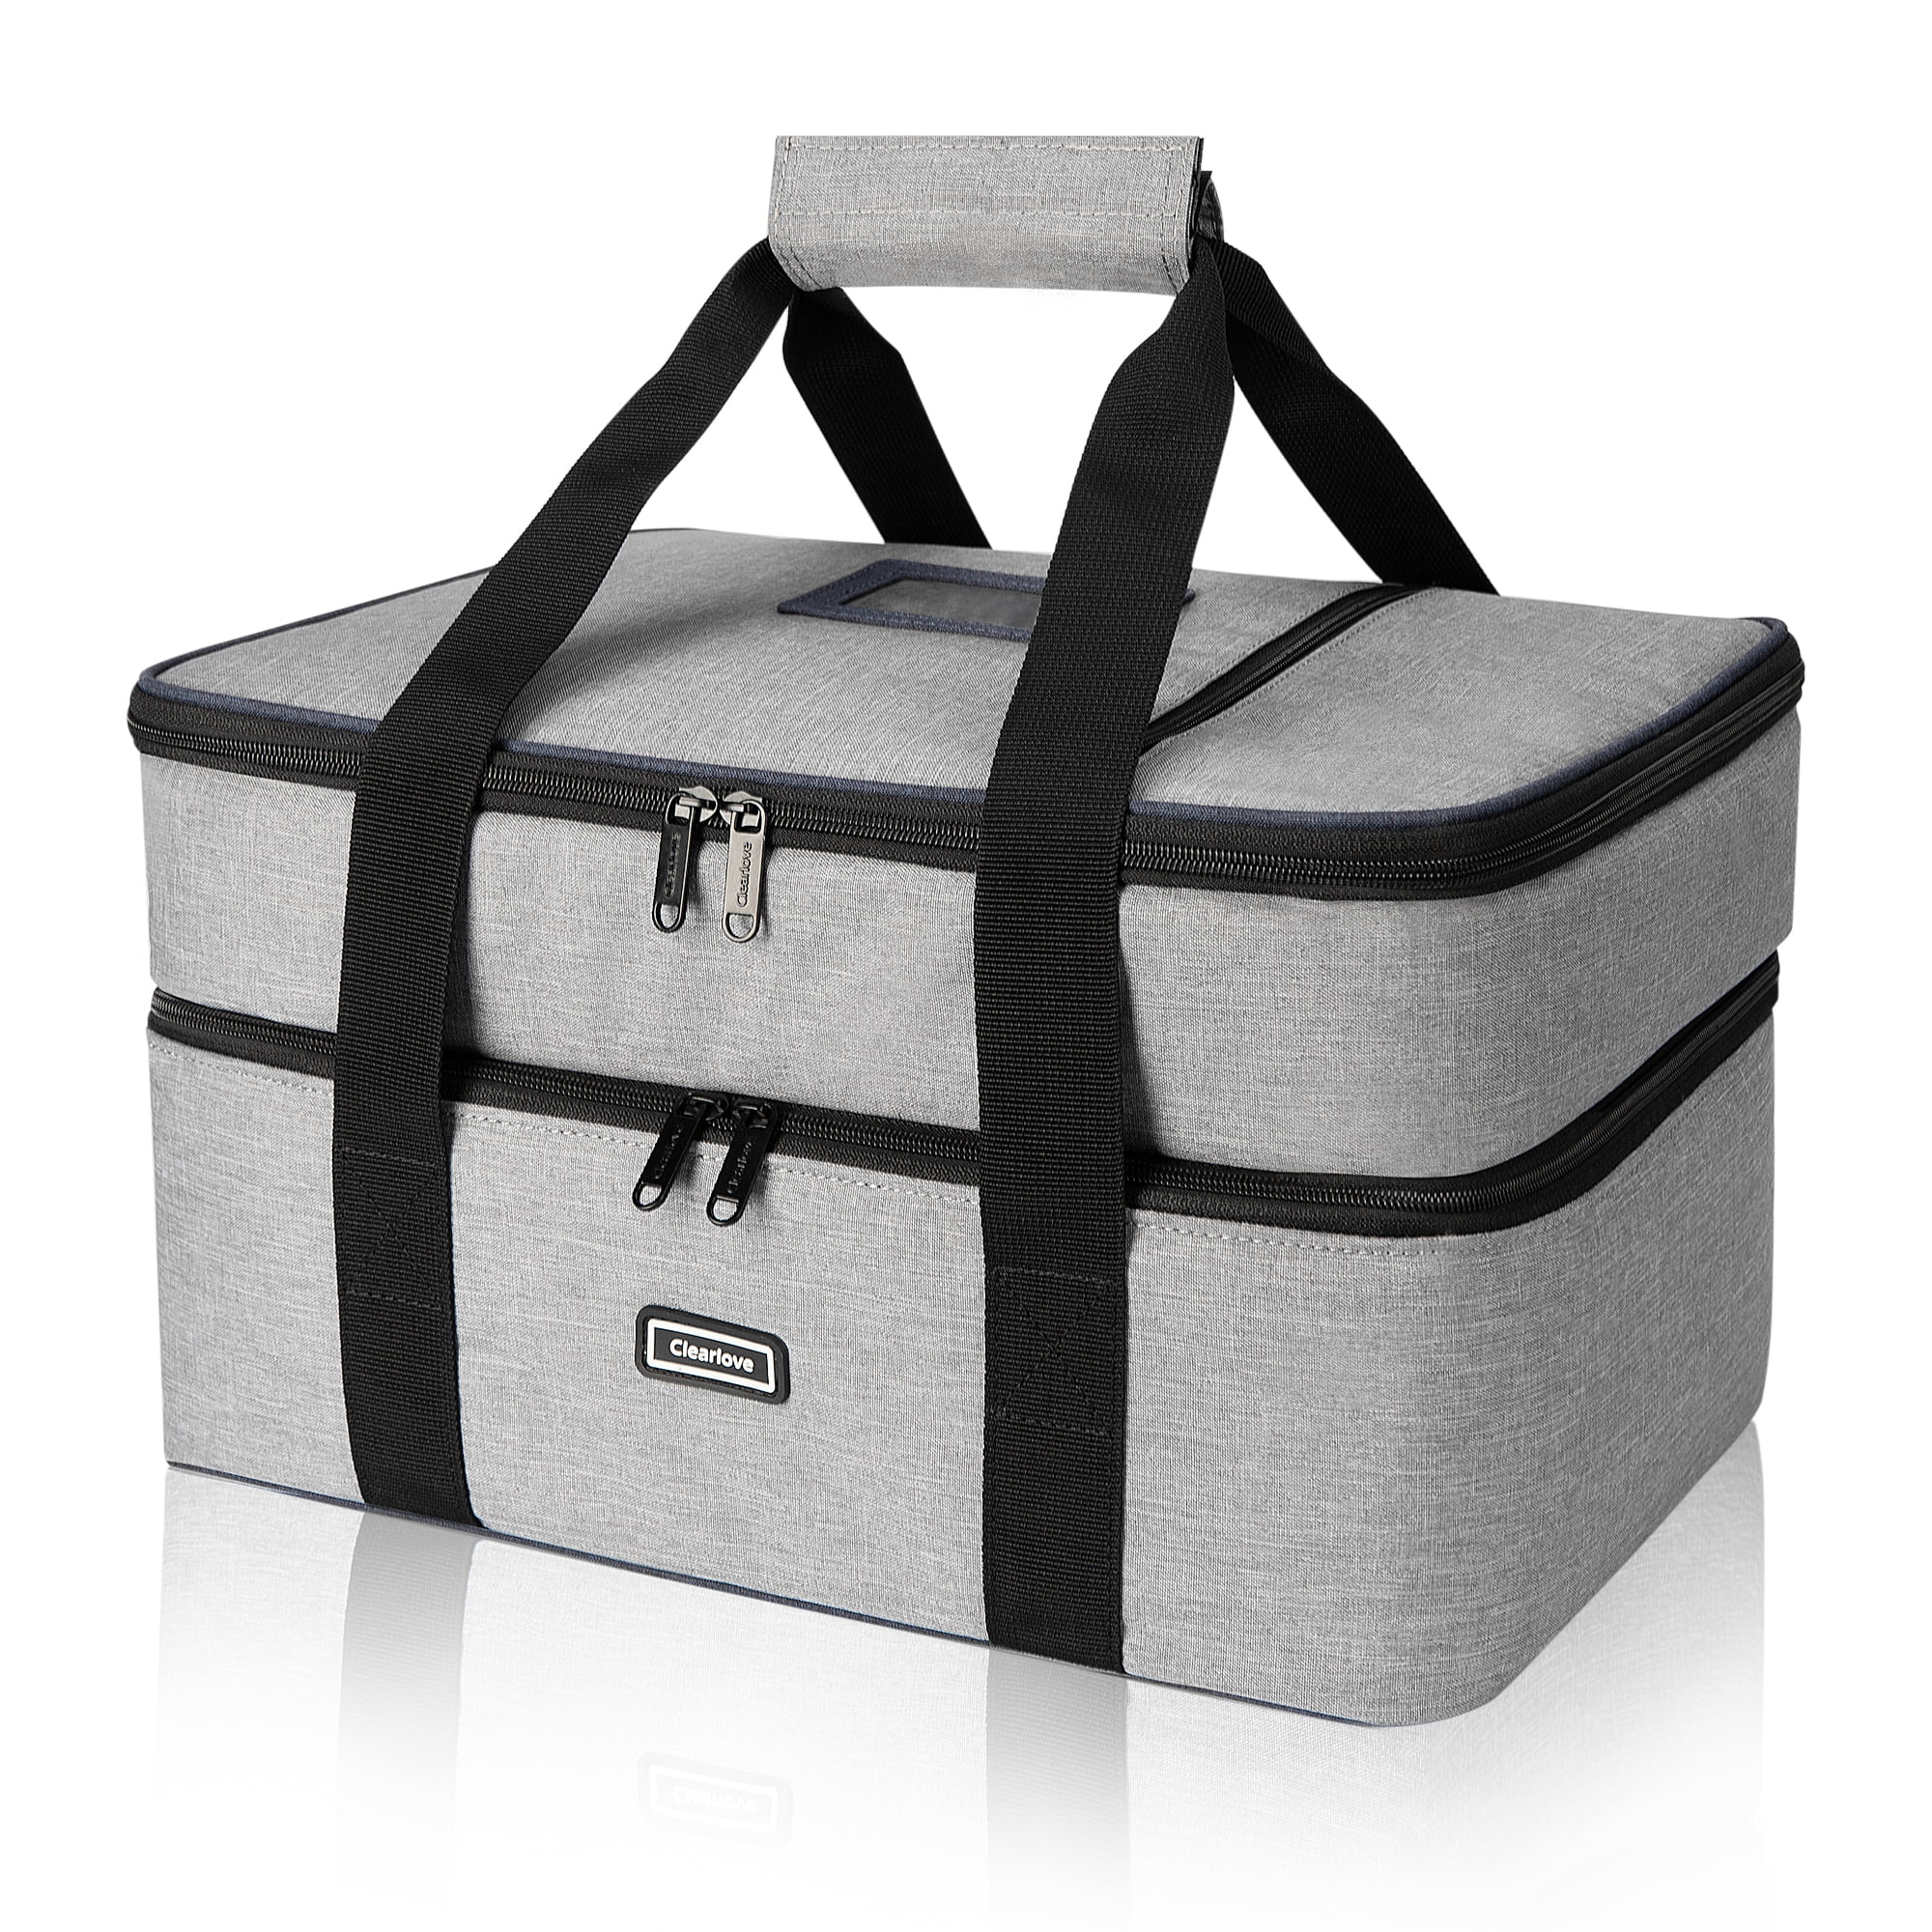 Hot/Cold Thermal Bag Insulated Expandable Double Casserole Carrier 